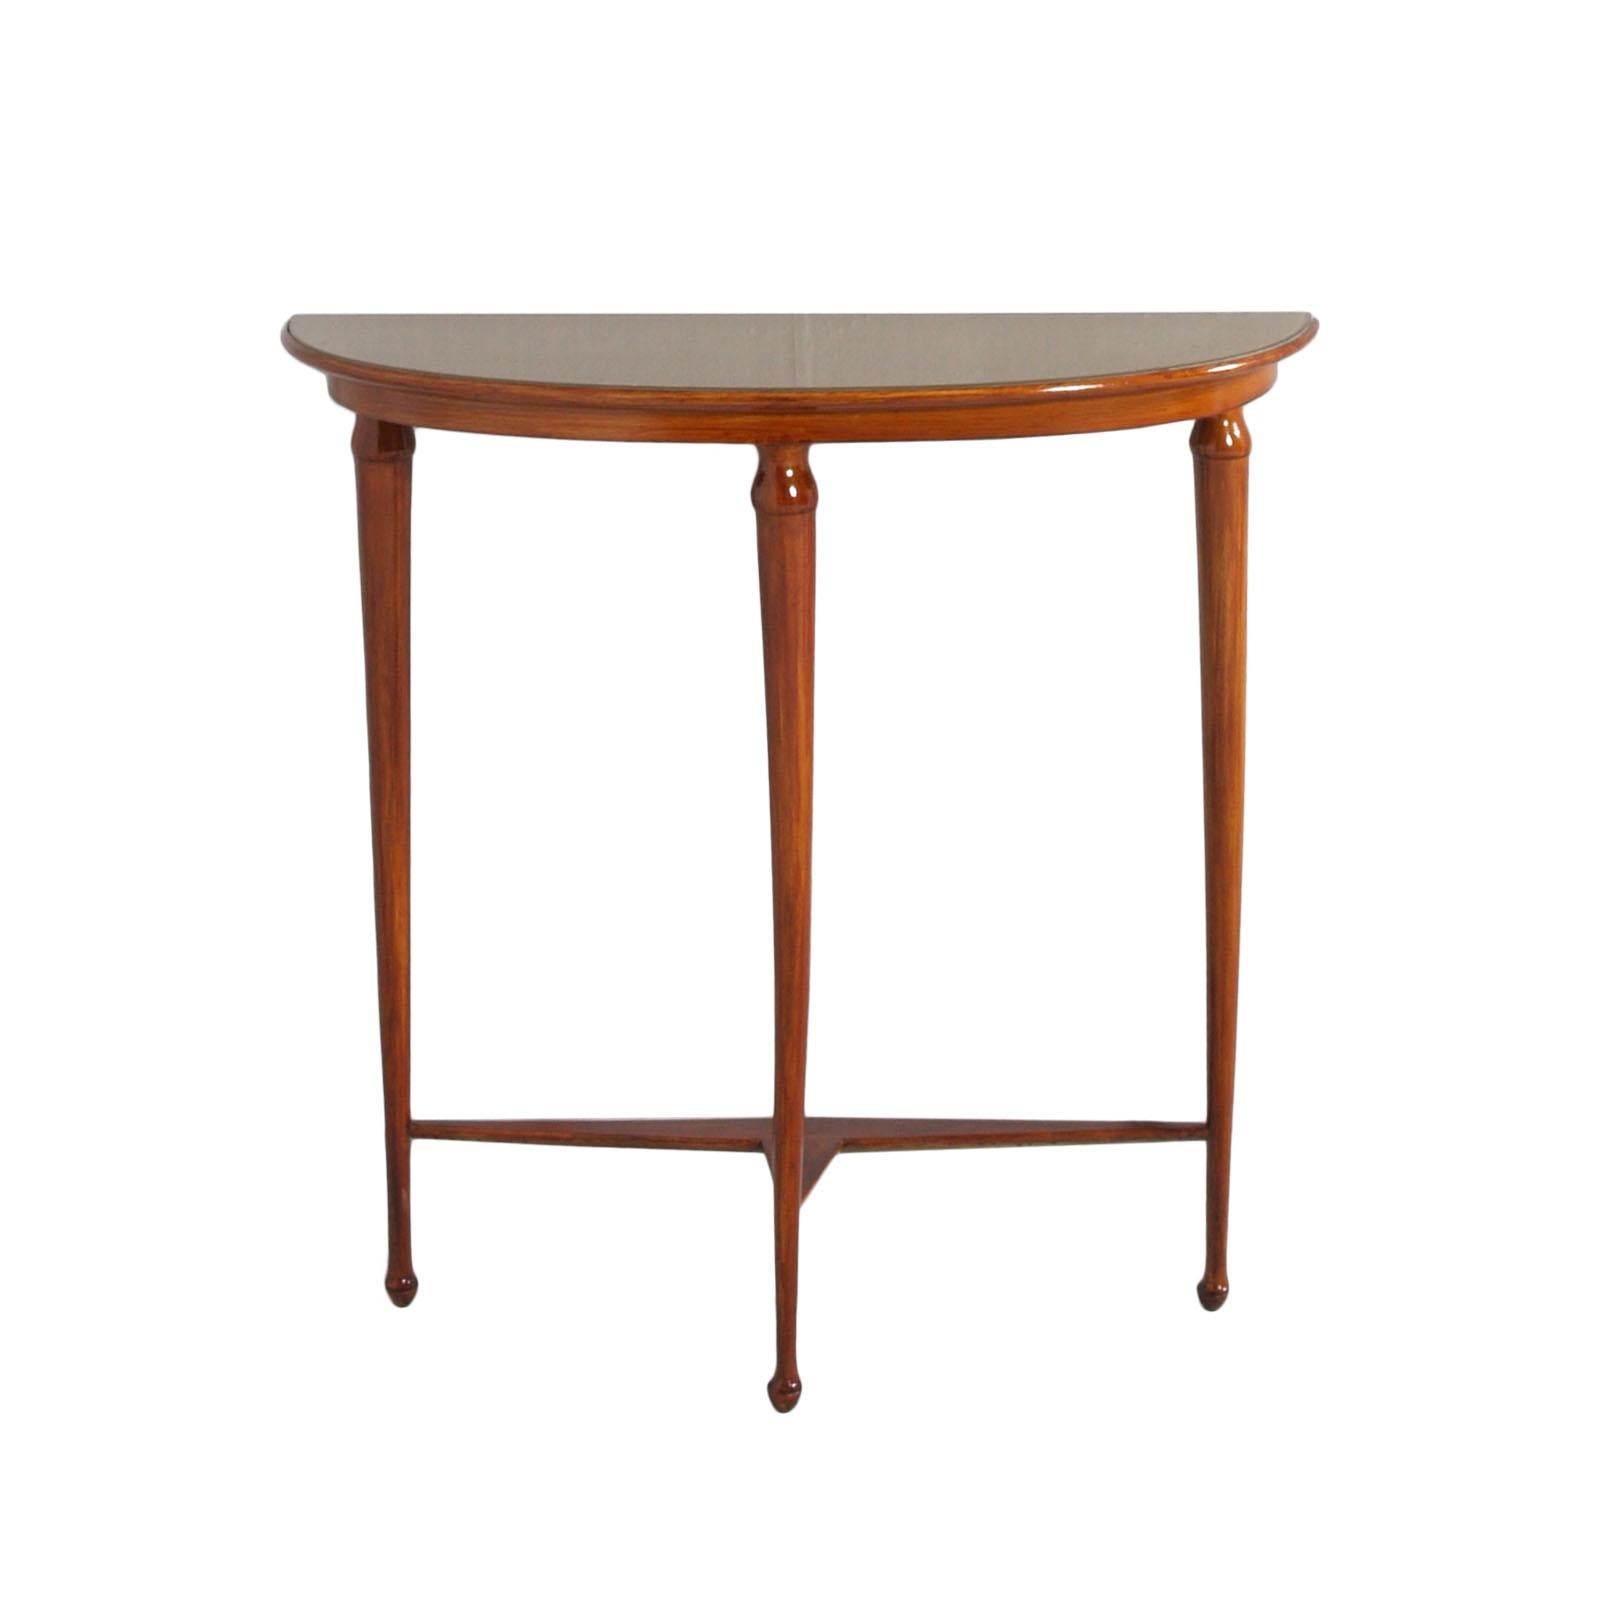 Console with mirror strongly attributable to Gio Ponti for the characteristic shapes of the console's legs and mirror; in walnut polished to wax. The top of the console is in lacquered glass in the lower part, with a pleasant shade matched to the